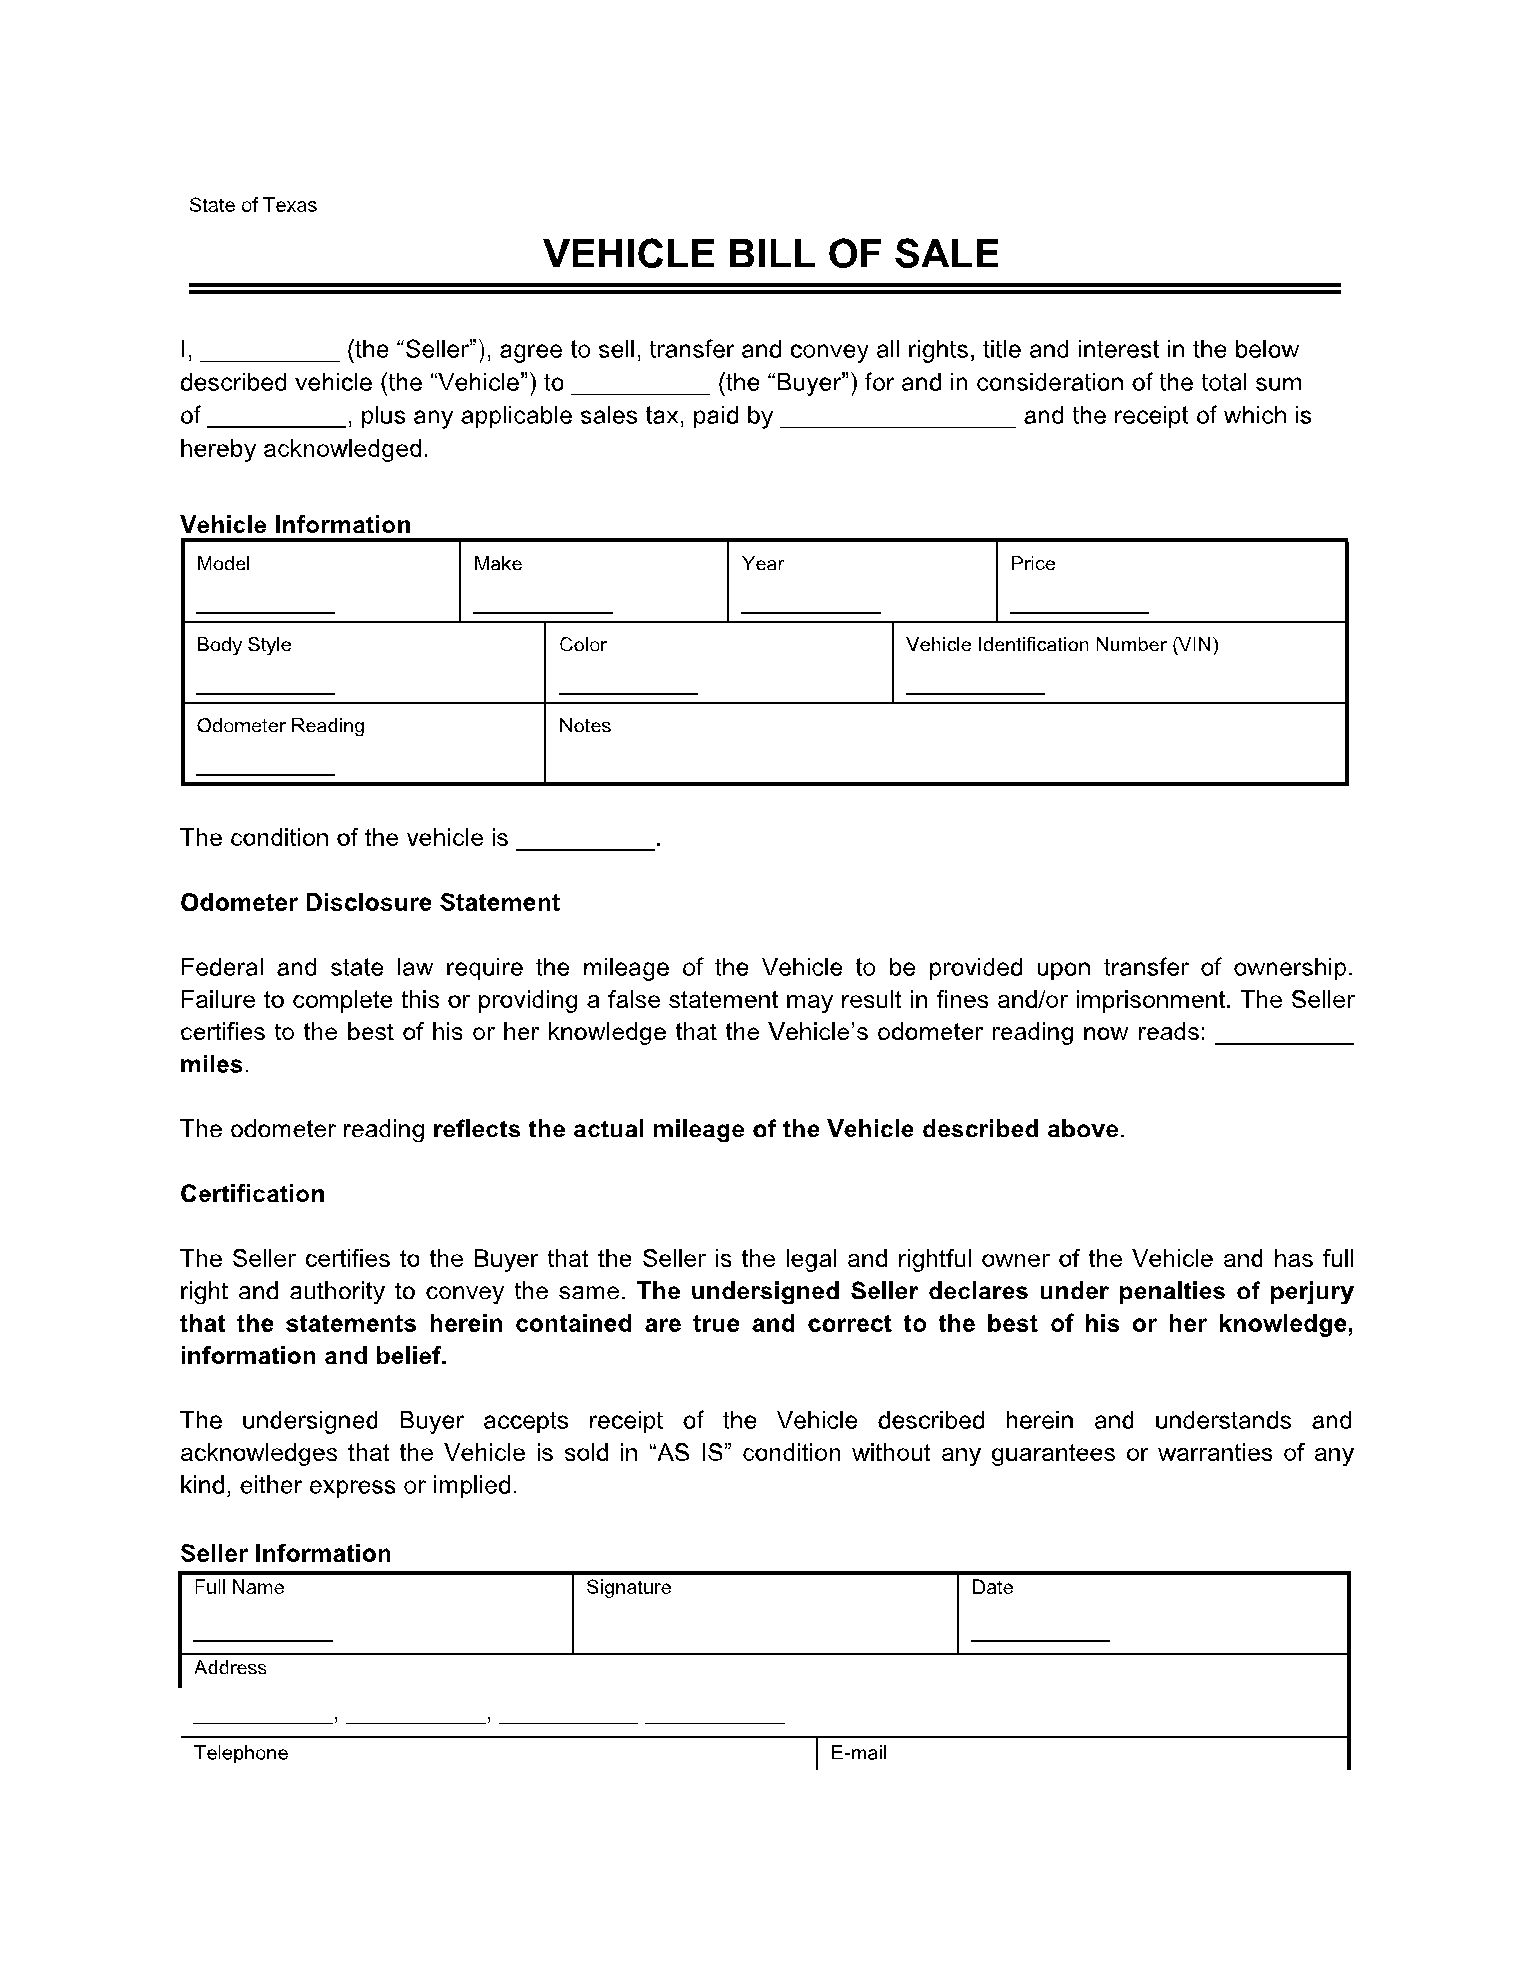 Texas Bill of Sale Vehicle Form